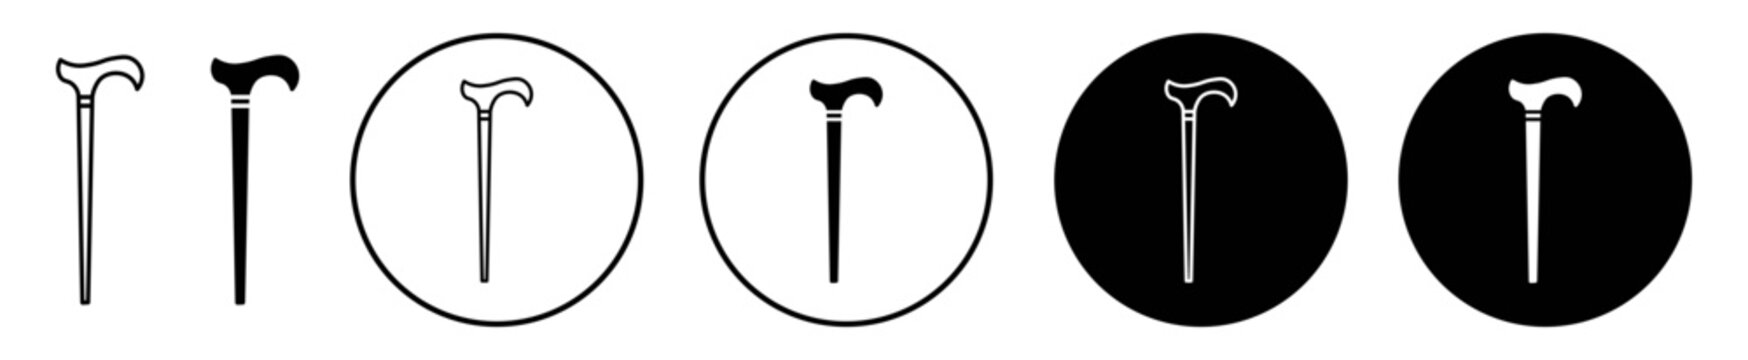 Walking stick icon set. old people walk stick vector symbol in black filled and outlined style.